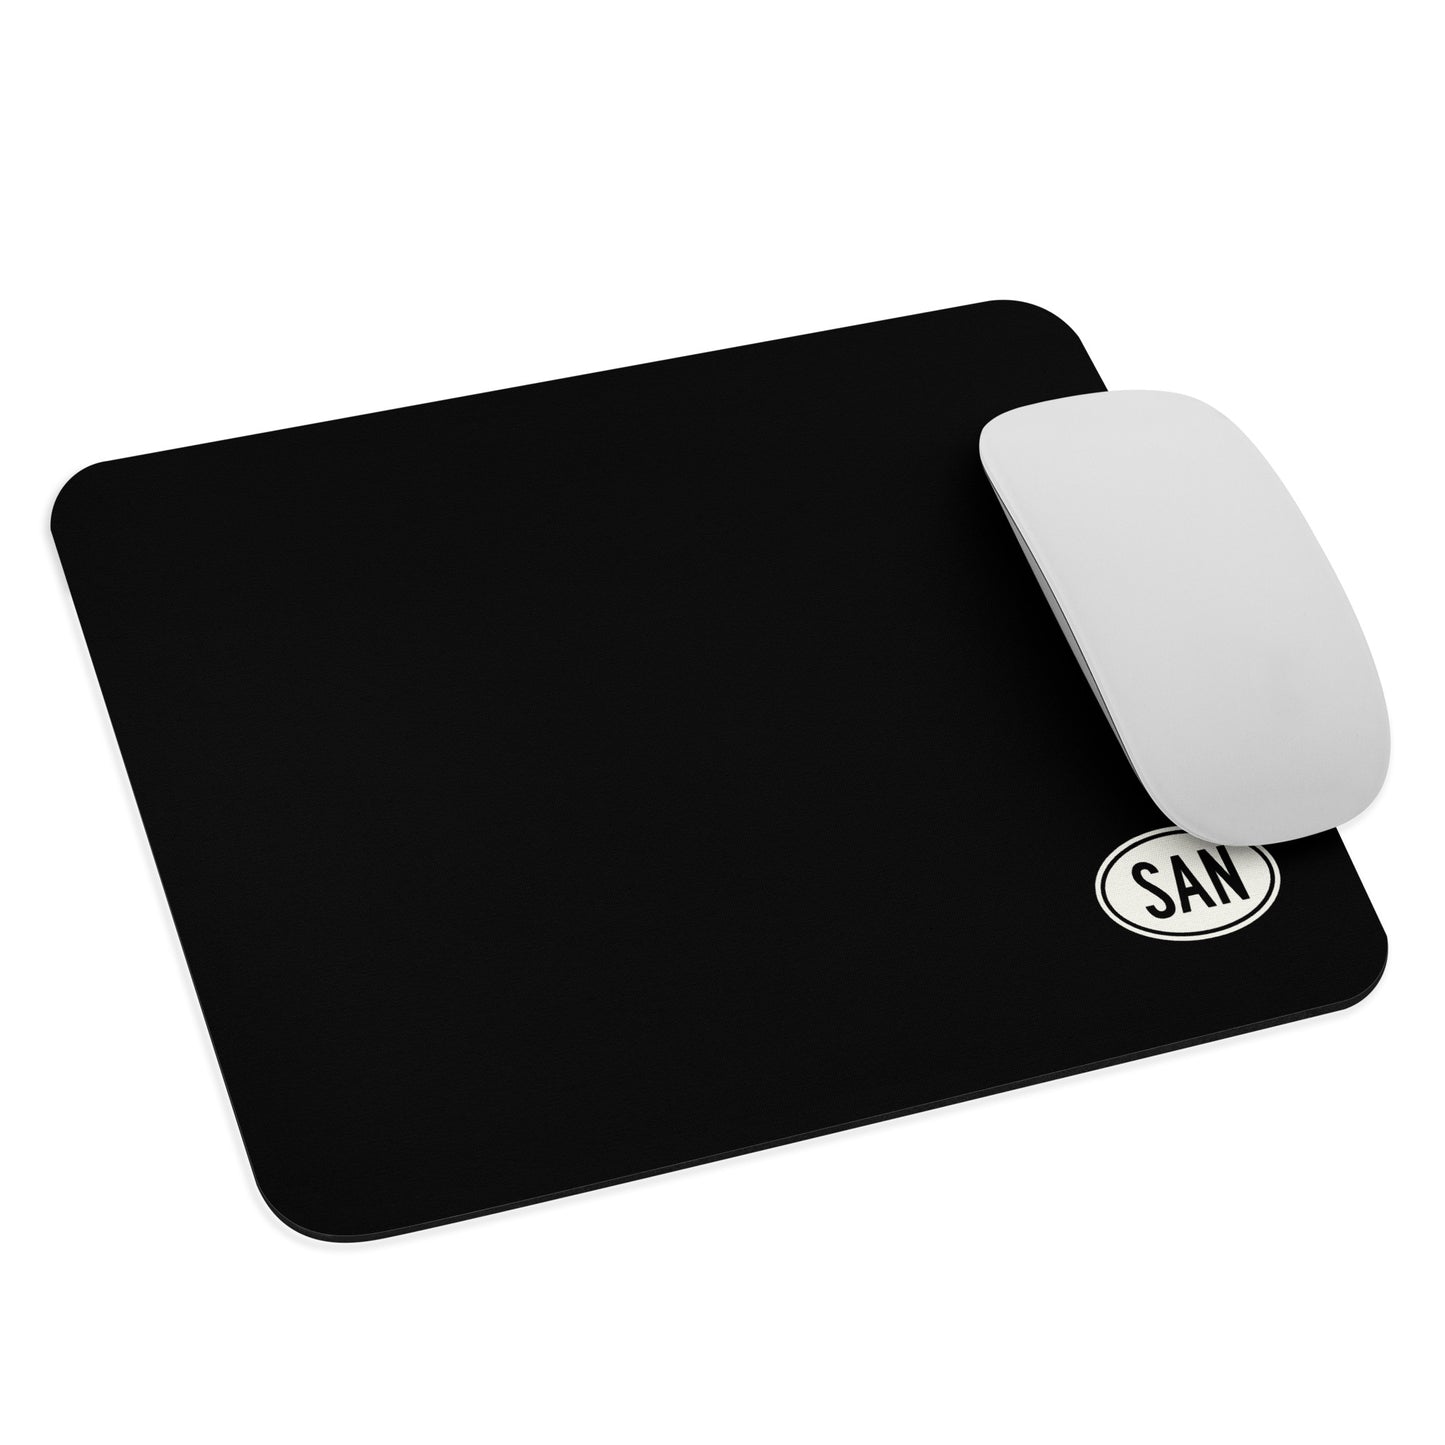 Unique Travel Gift Mouse Pad - White Oval • SAN San Diego • YHM Designs - Image 03